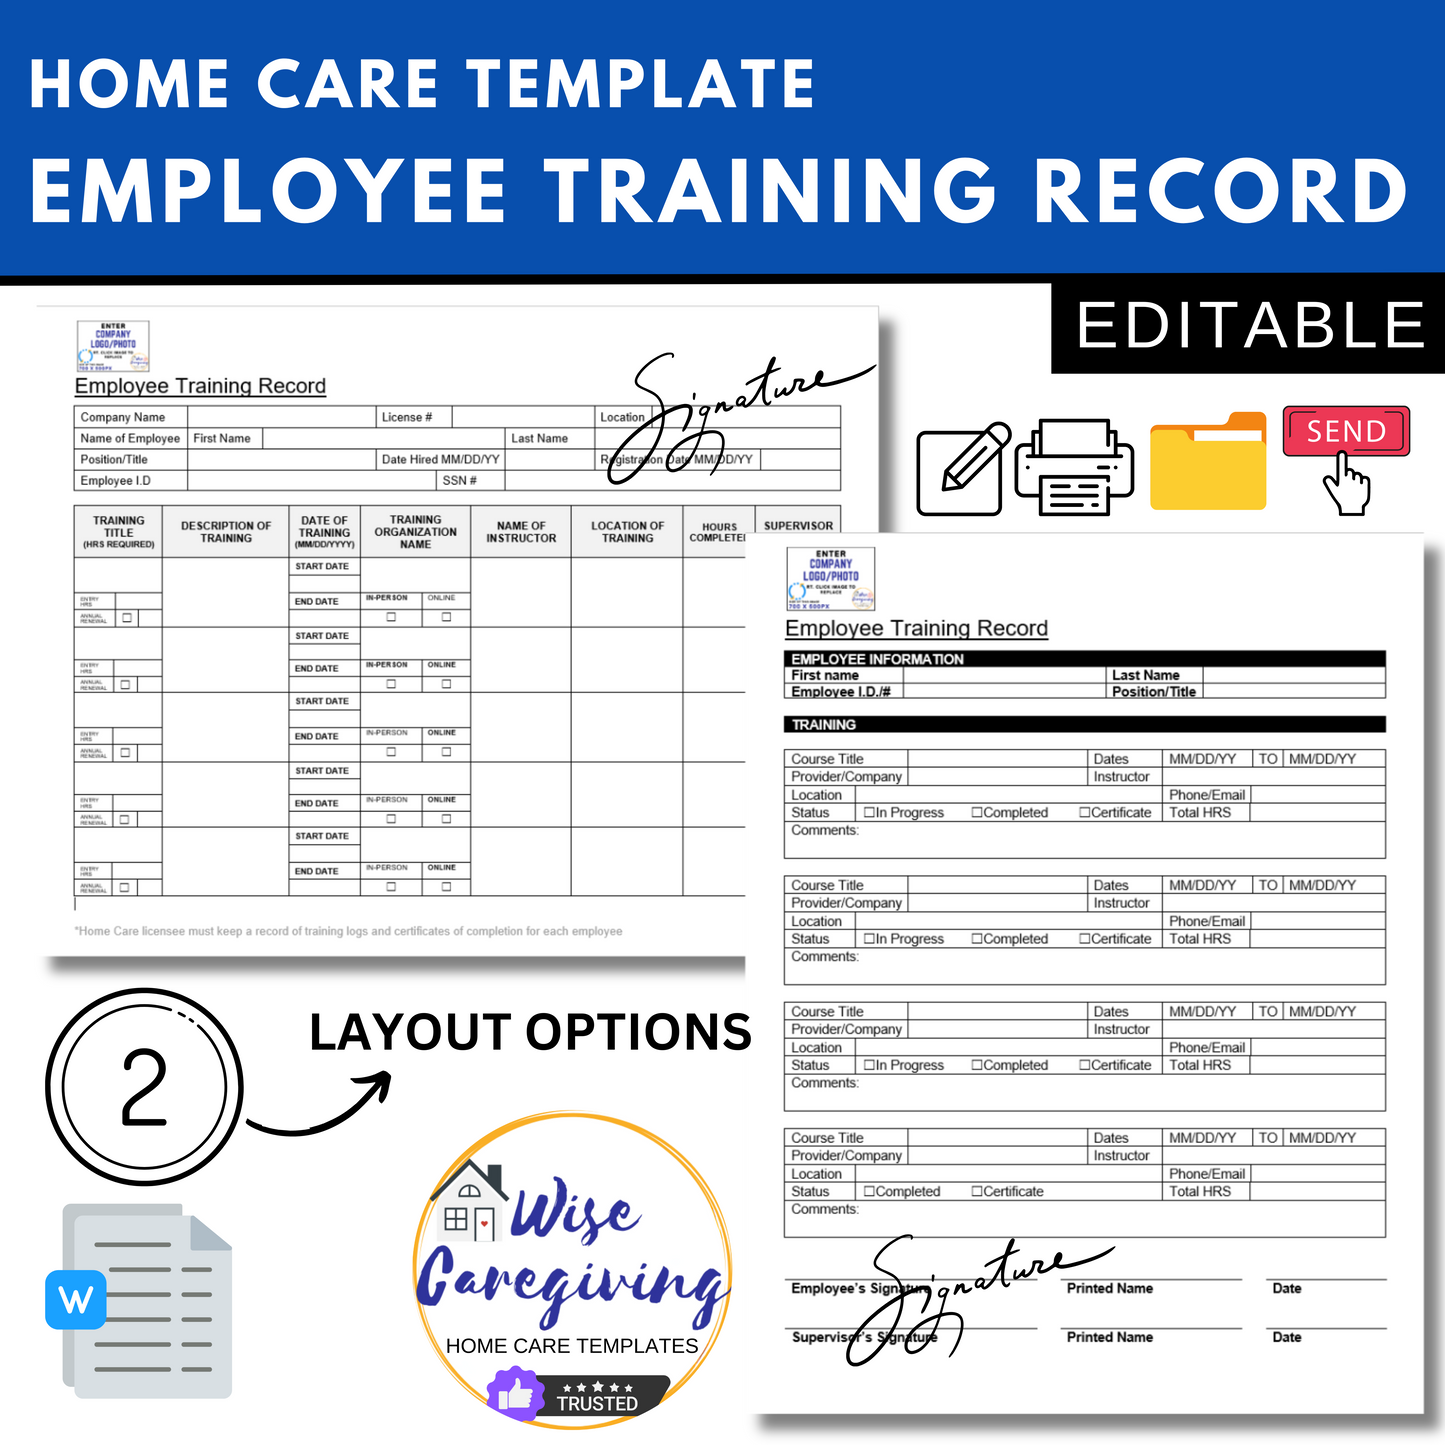 Home Care Employee Training Records Template Pack